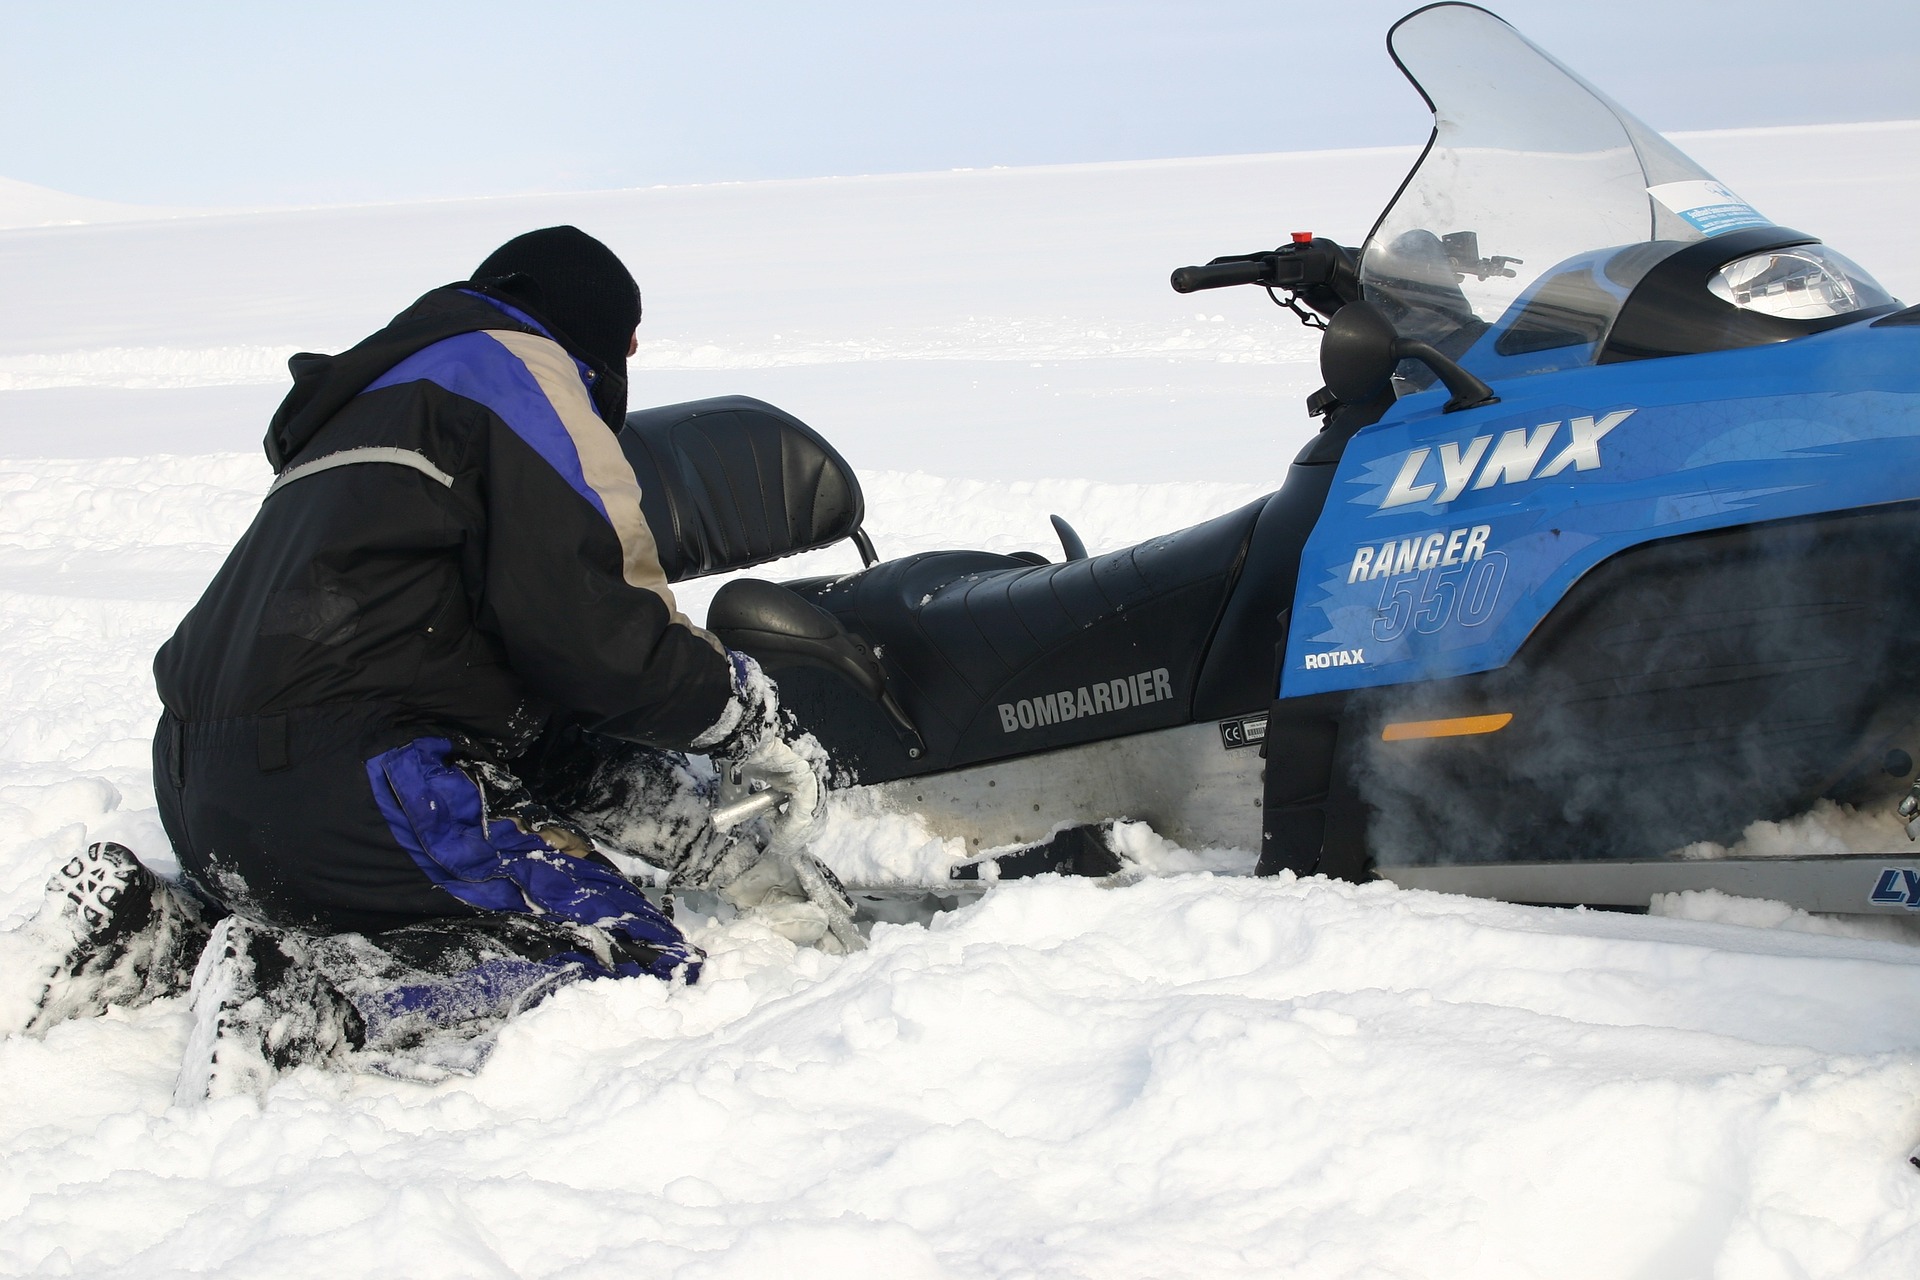 Snowmobile Safety Tips